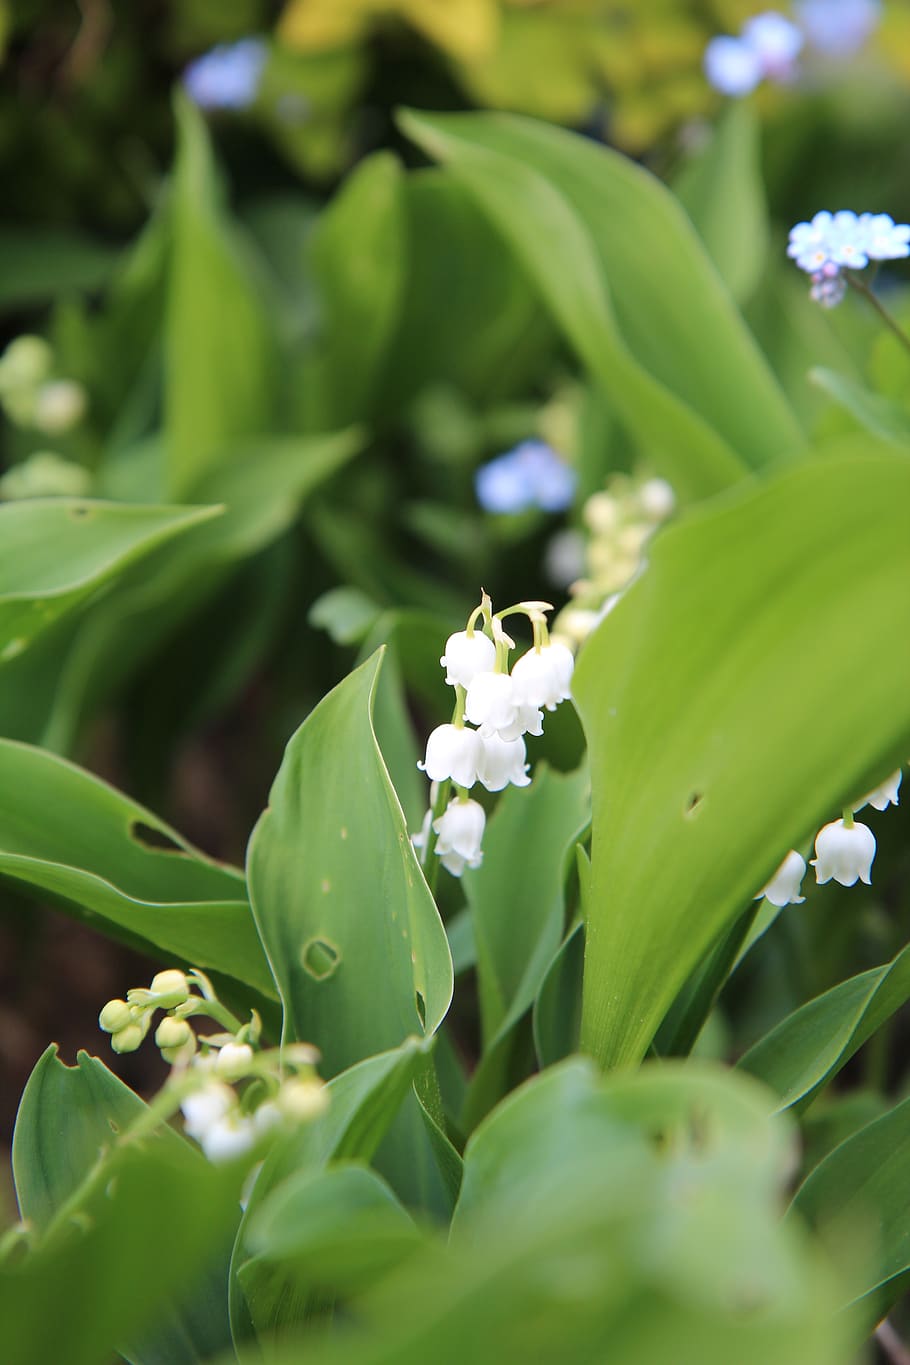 thrush, lily of the valley white, bell, may 1, plant, growth